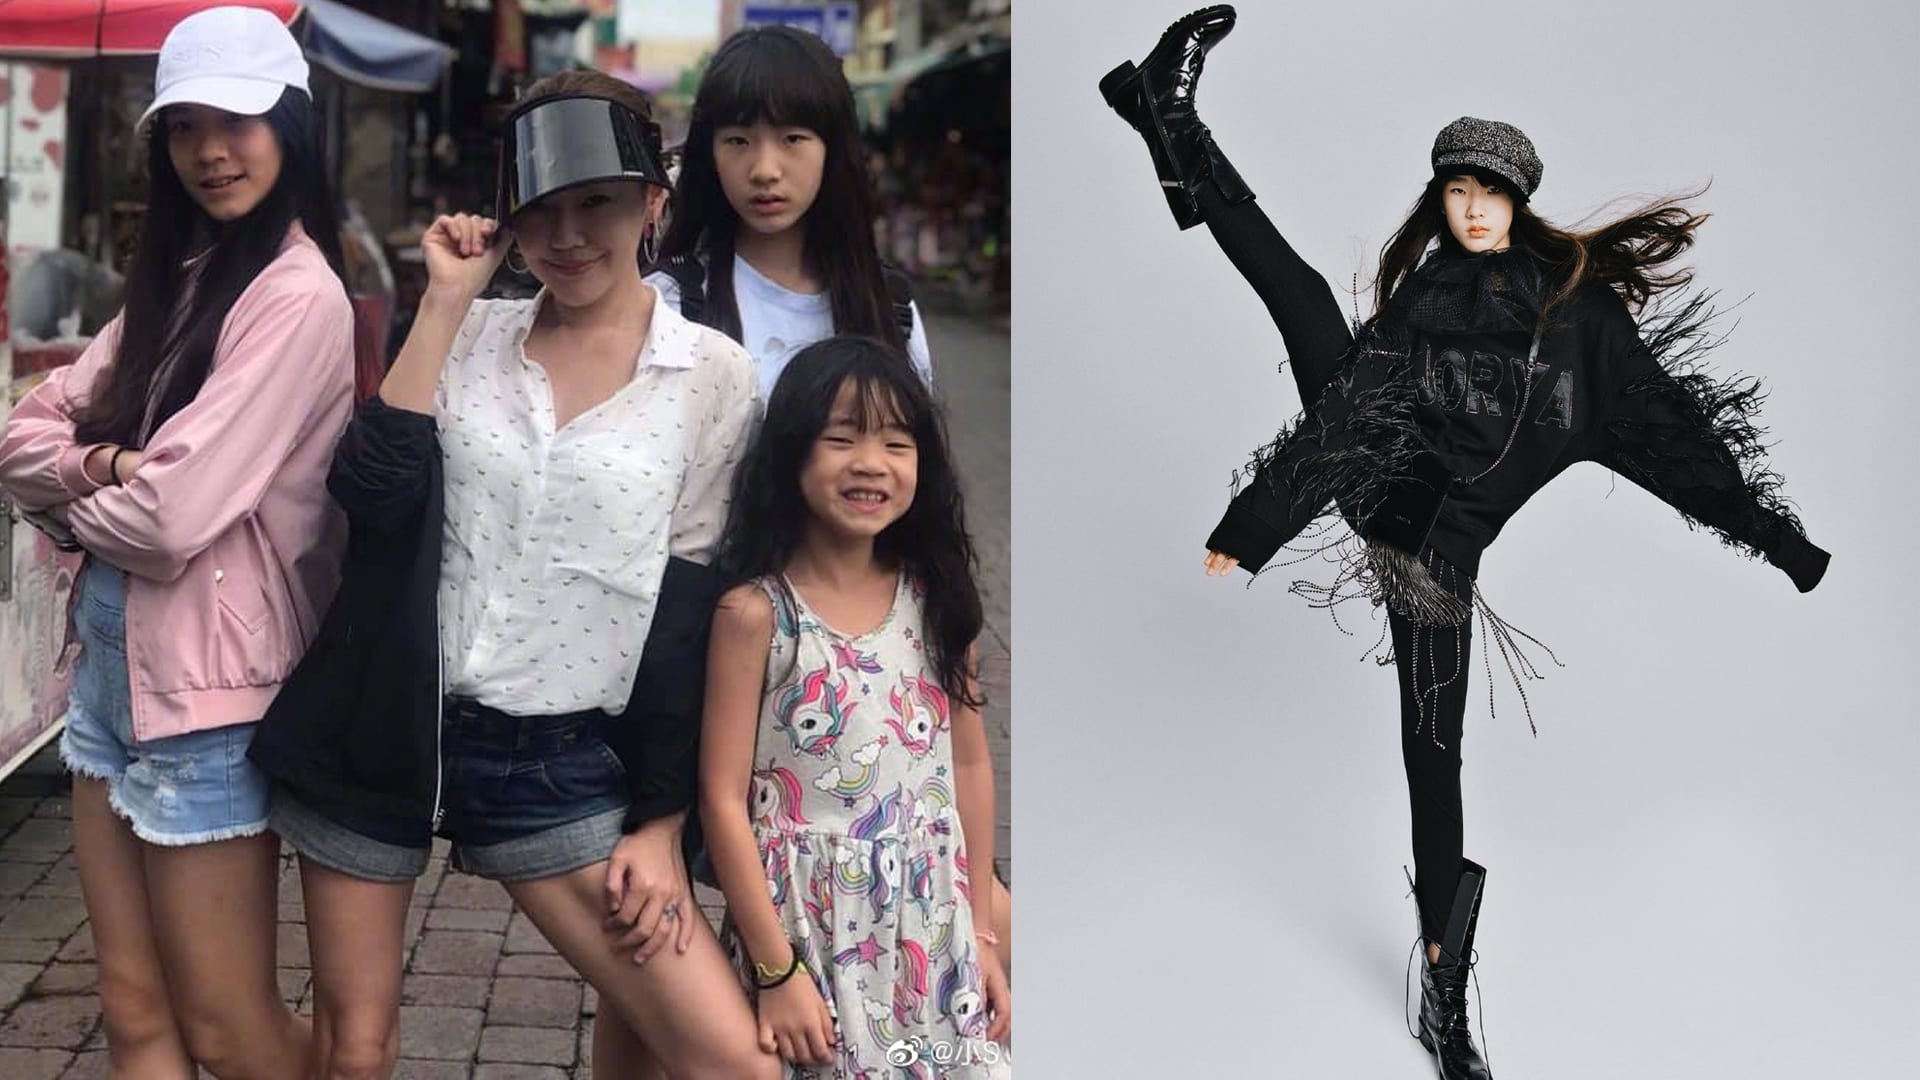 Dee Hsu’s 13-Year-Old Daughter Is The New Face Of Fashion Brand But Why Does The Star Want To Give Her A Flying Kick?